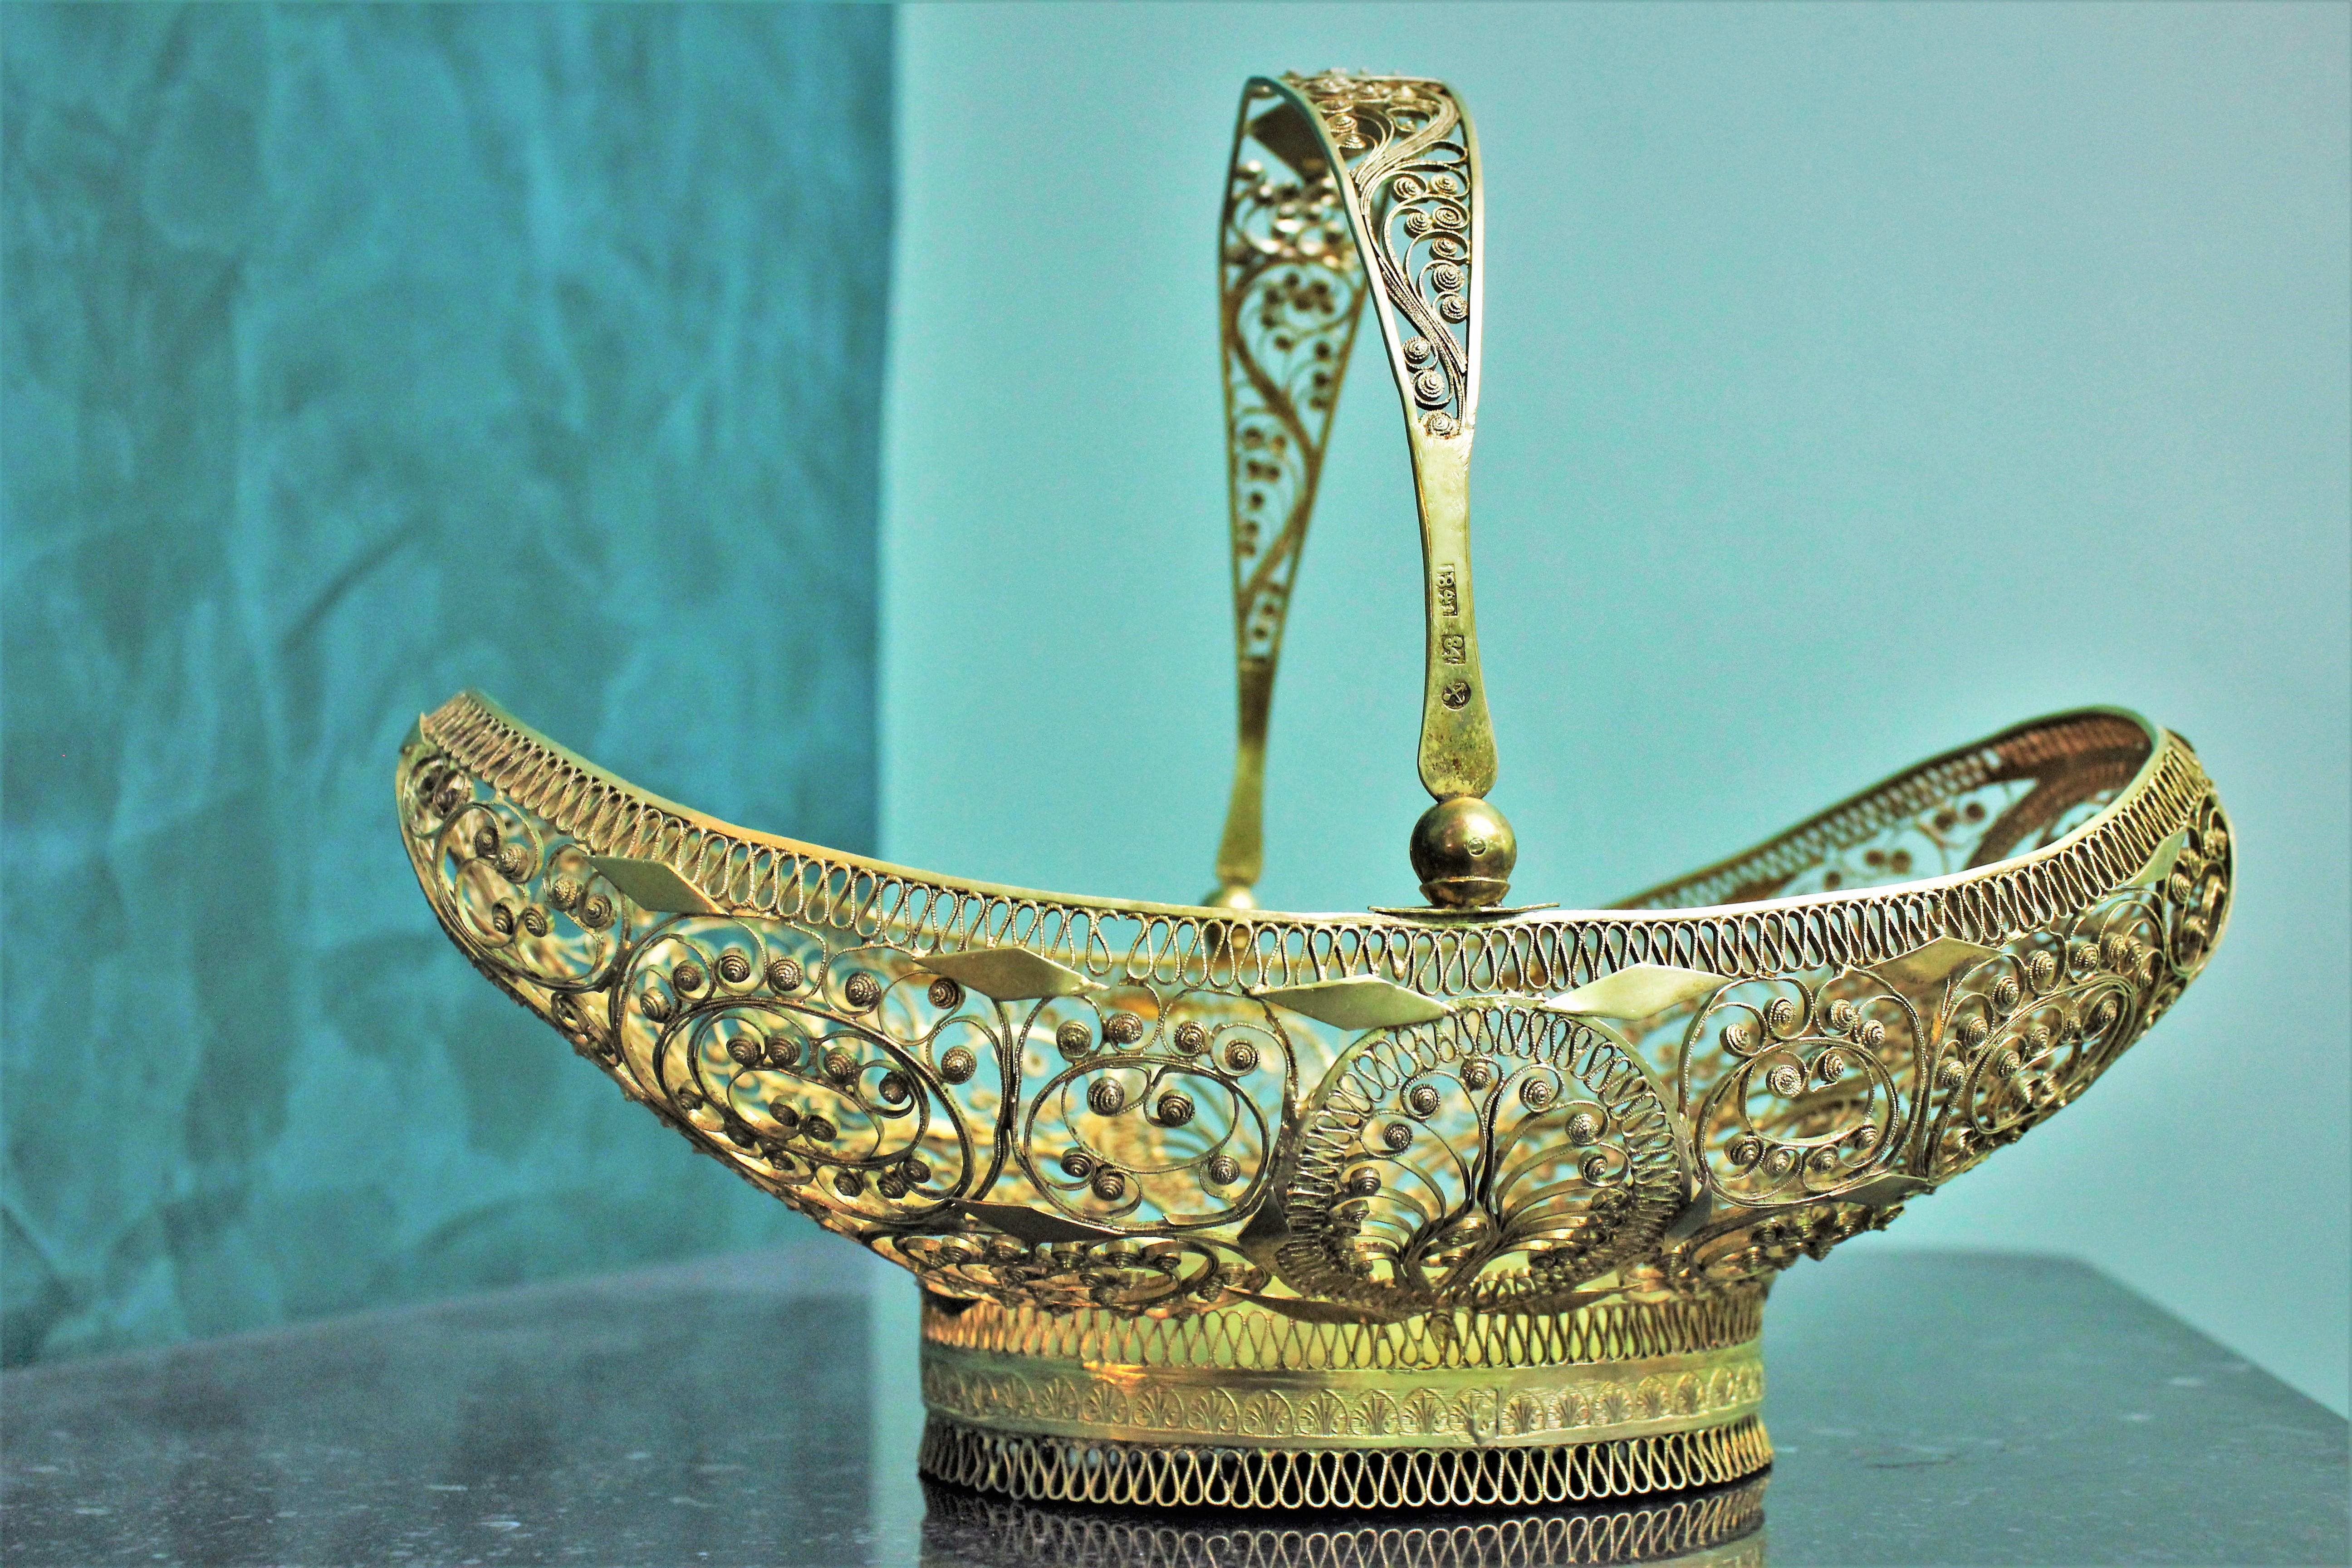 Wonderful vermeil silver basket realized with the filigree technique. Perfect in every part, no structural damages and very good condition or the vermeil covering. 

Realized in St. Petersburg, Russia in 1841.

Size: 25 x 16 cm - Height 19 cm